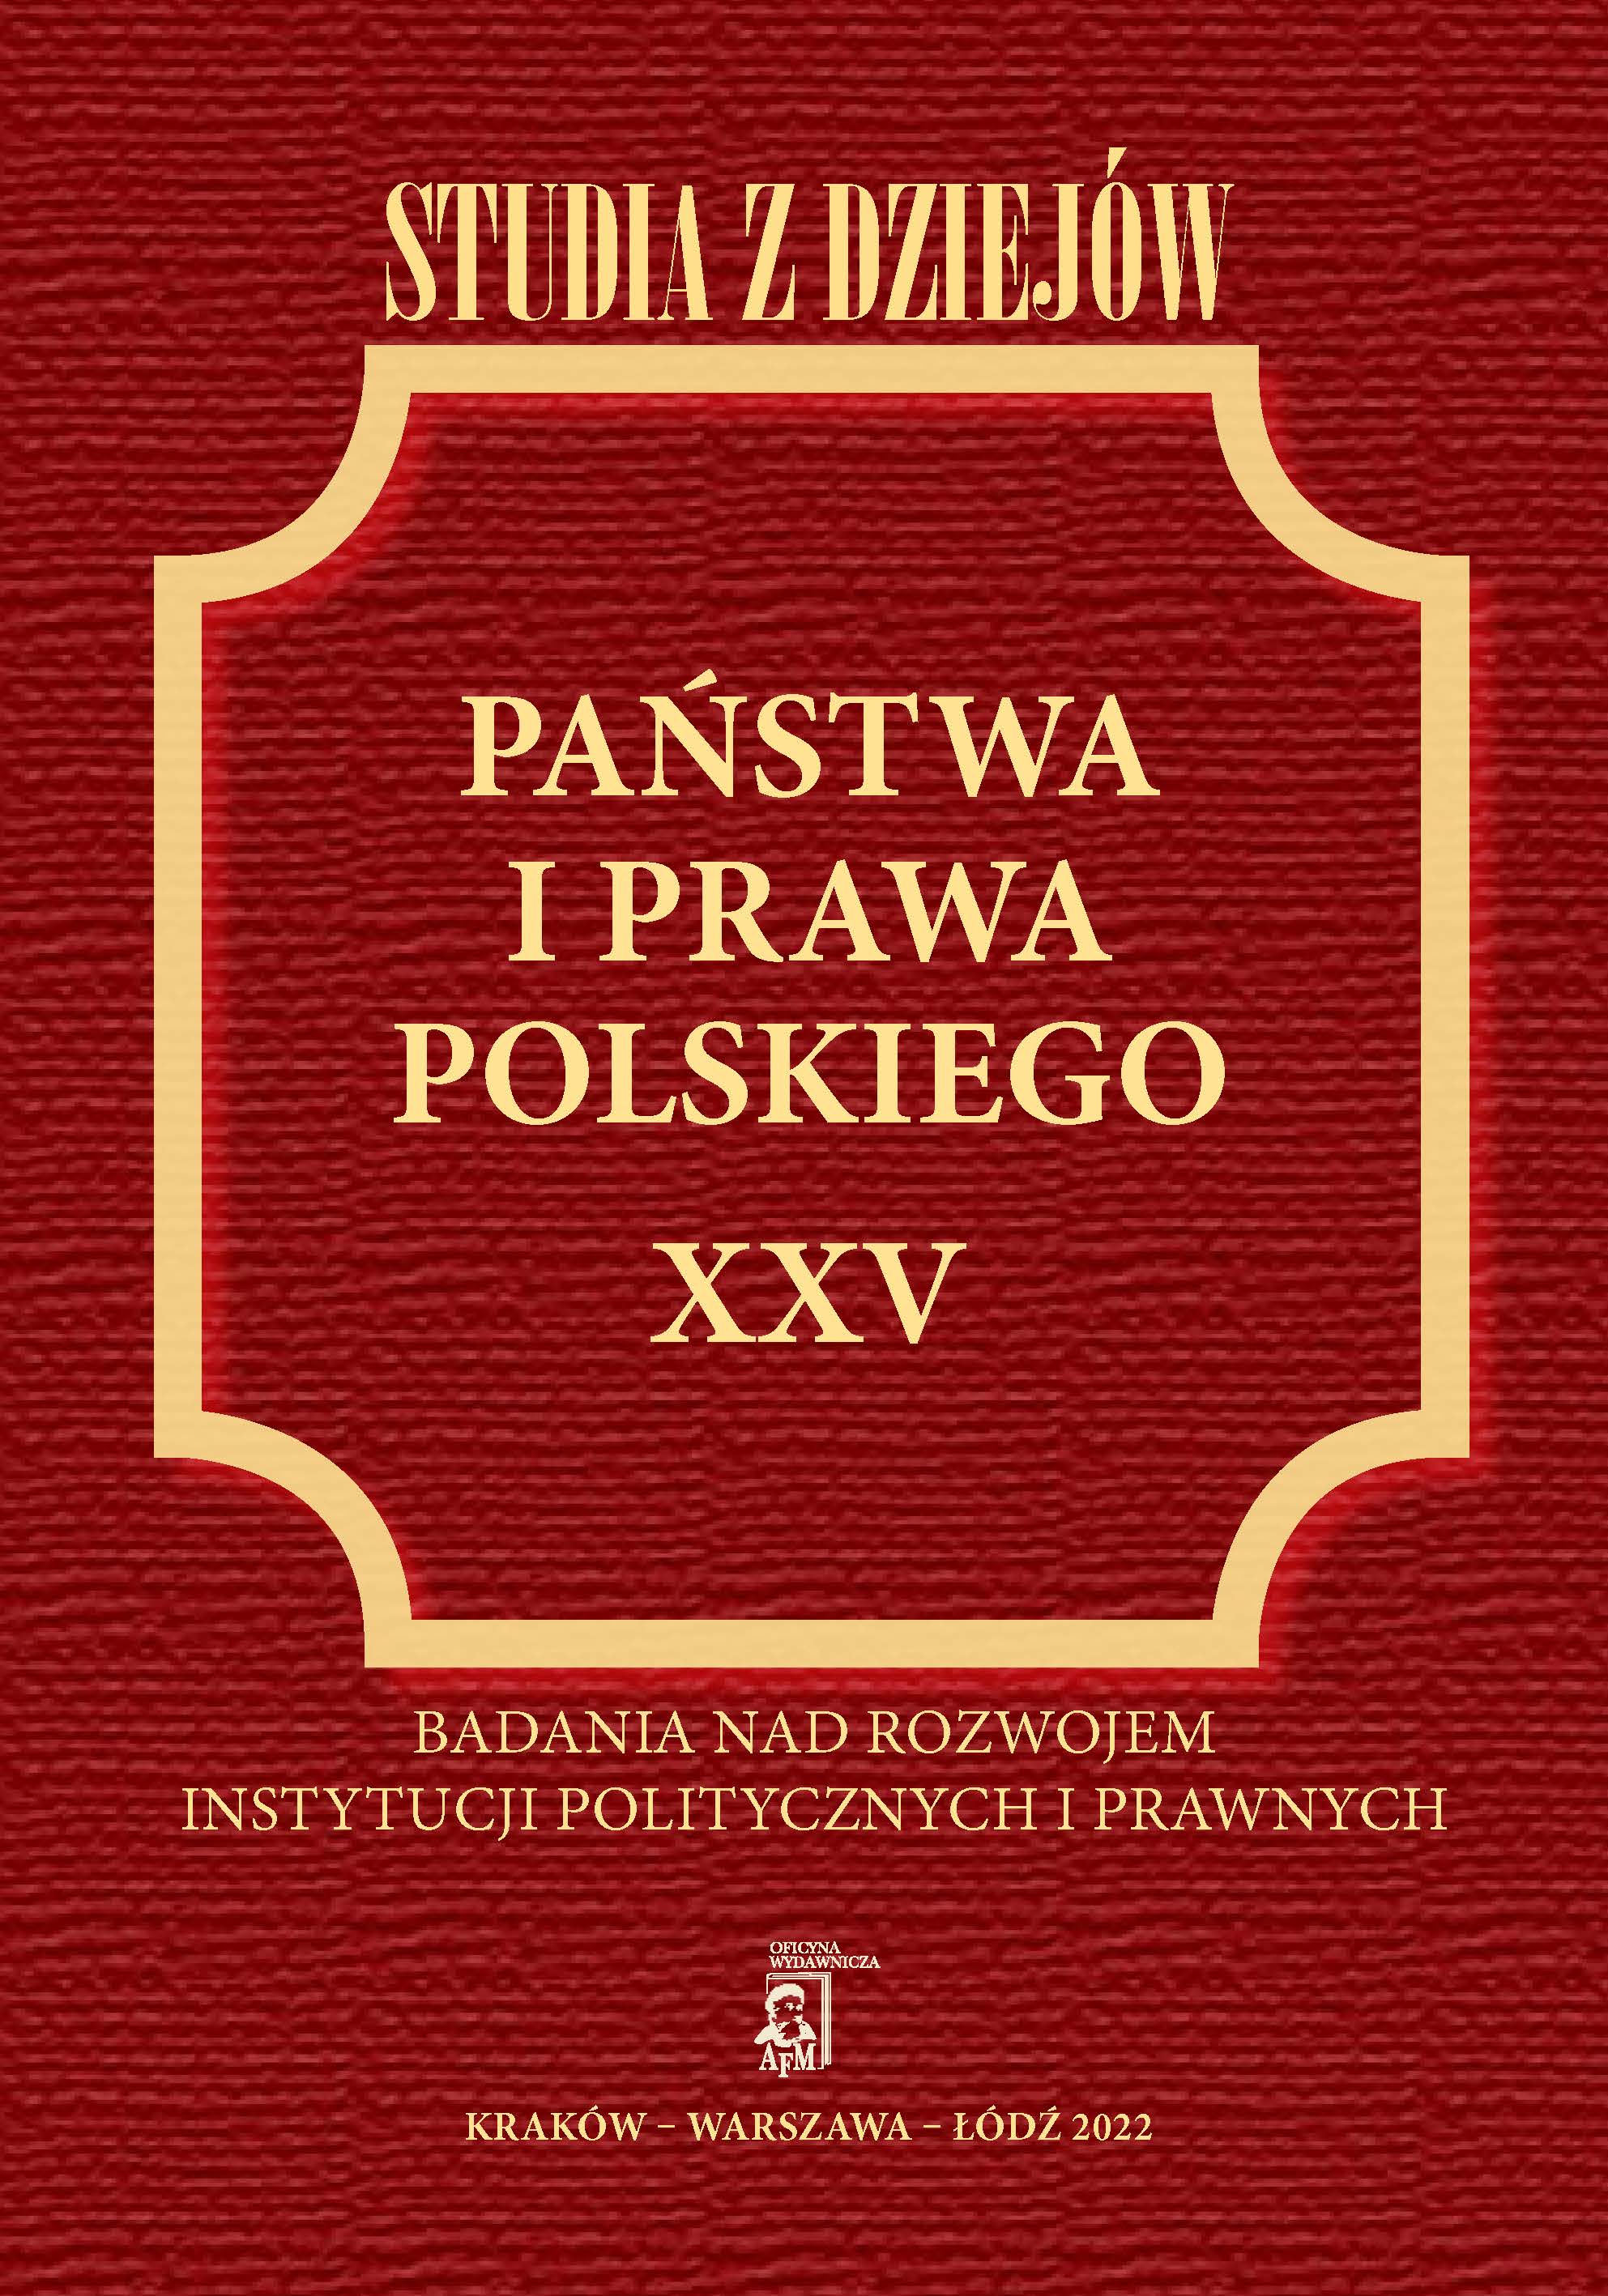 Matrimonial property regimes in the Congress Kingdom of Poland on the basis of premarital contracts drawn up by the first notaries in Łódź Cover Image